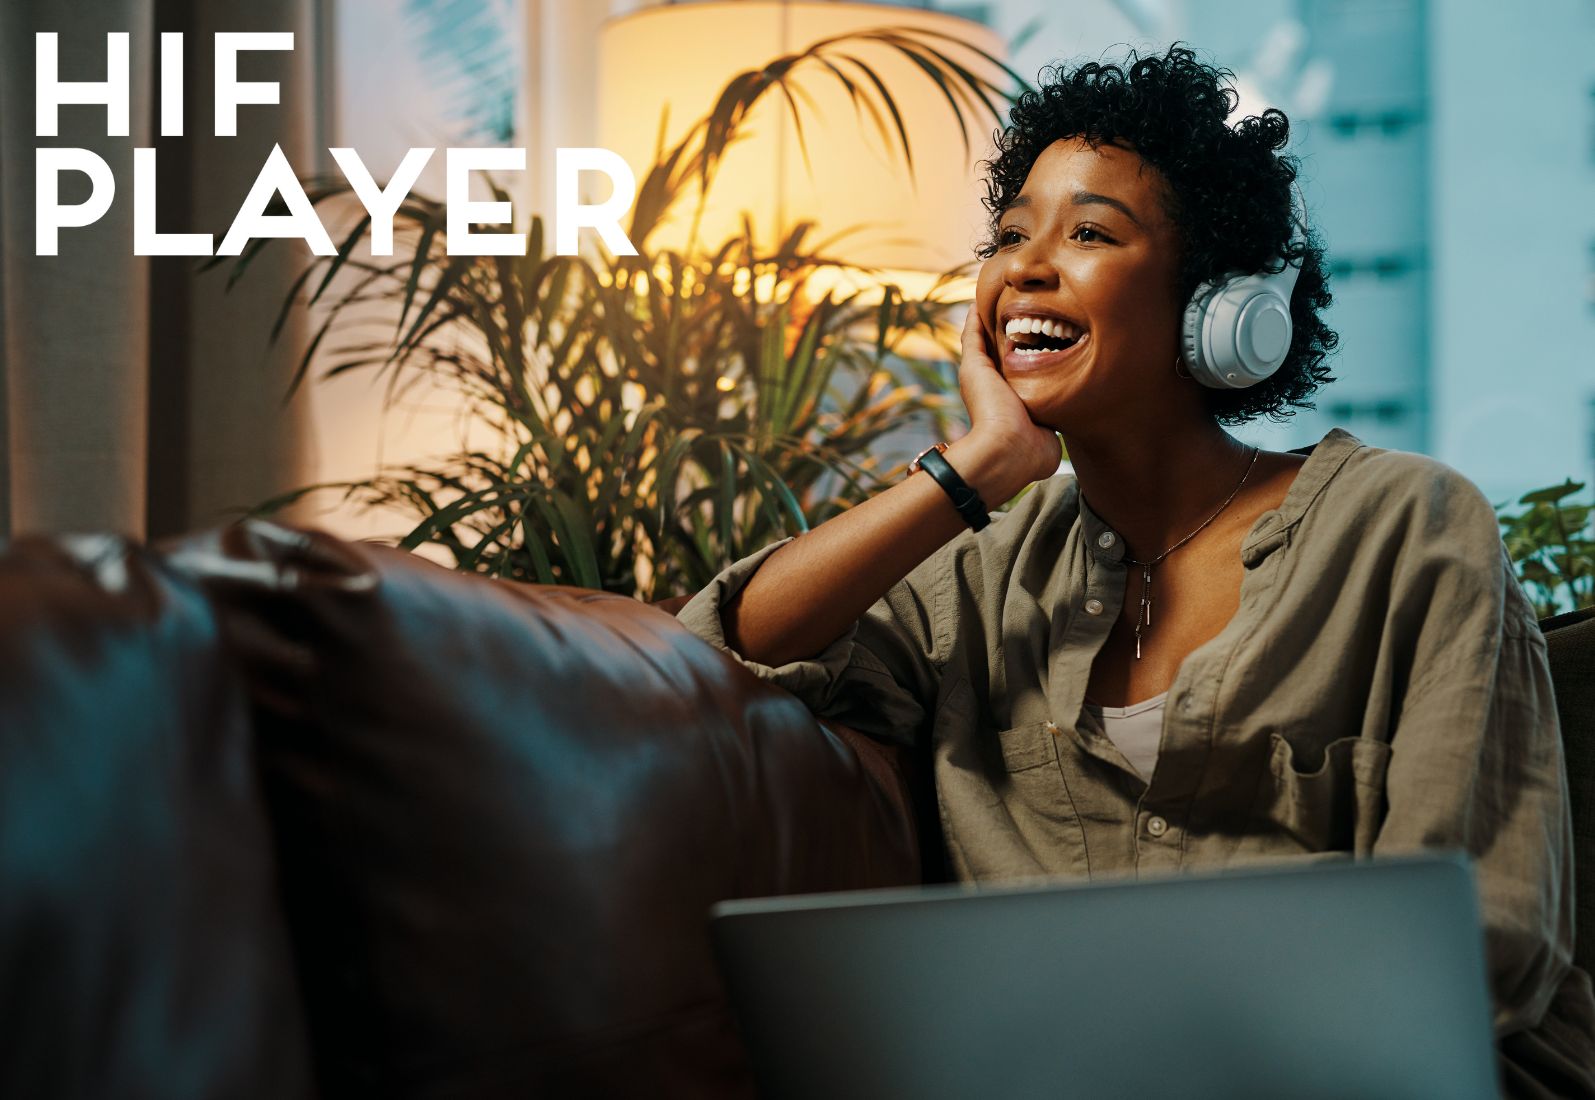 HIF Player brings all the fun of the Festival to your home